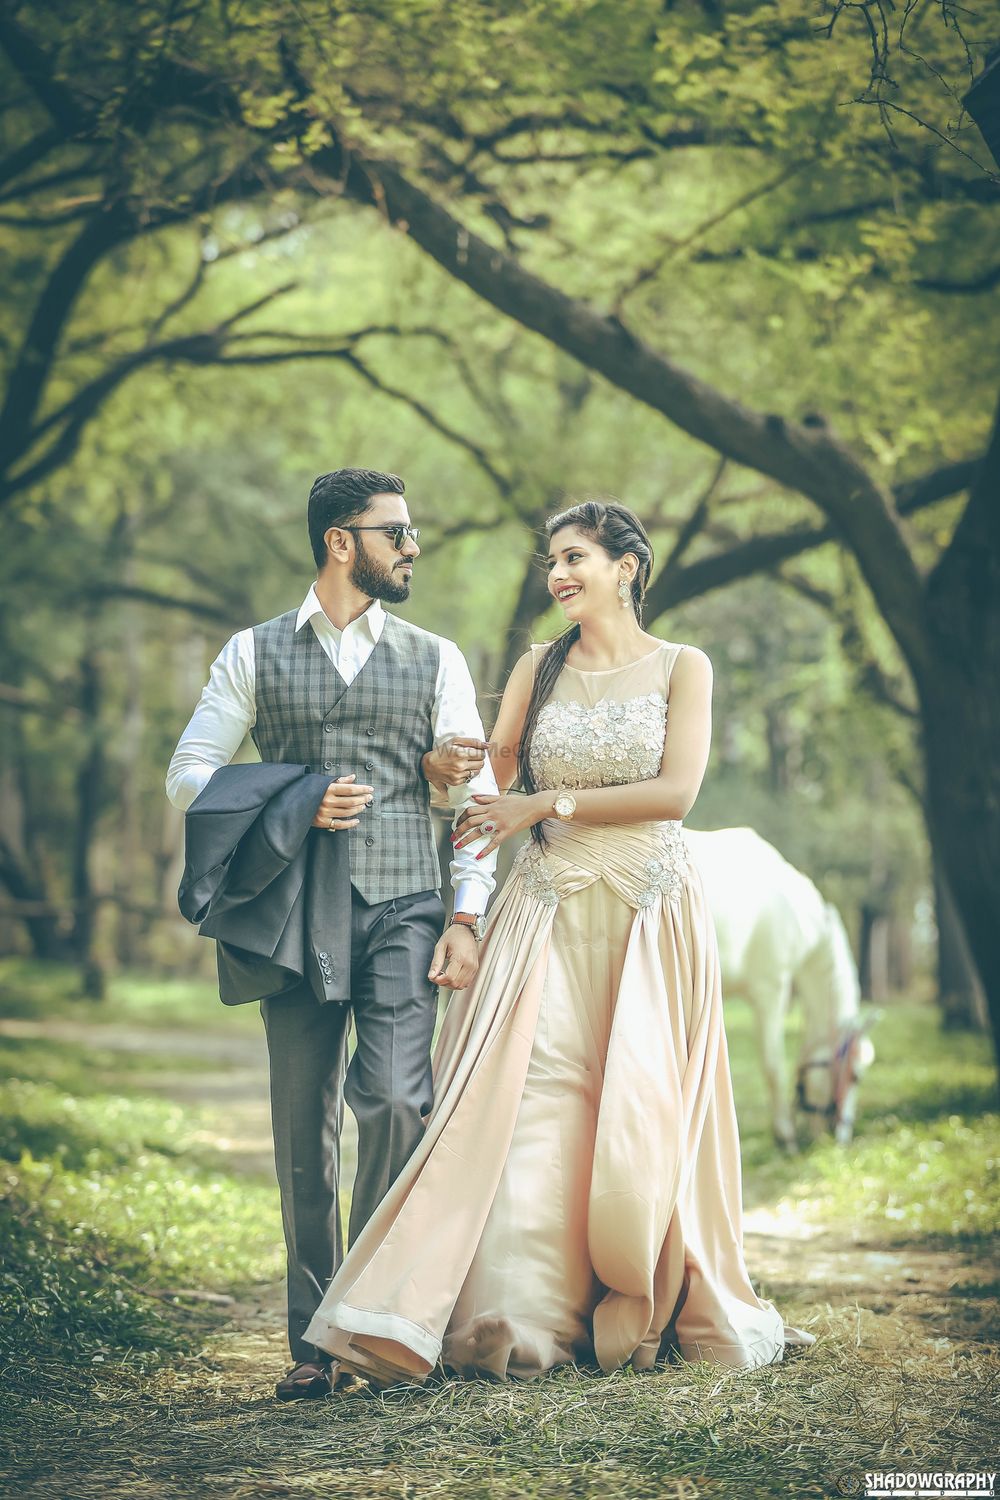 Photo From RAJAT + APURVA PRE SHOOT - By Shadowgraphy Studio